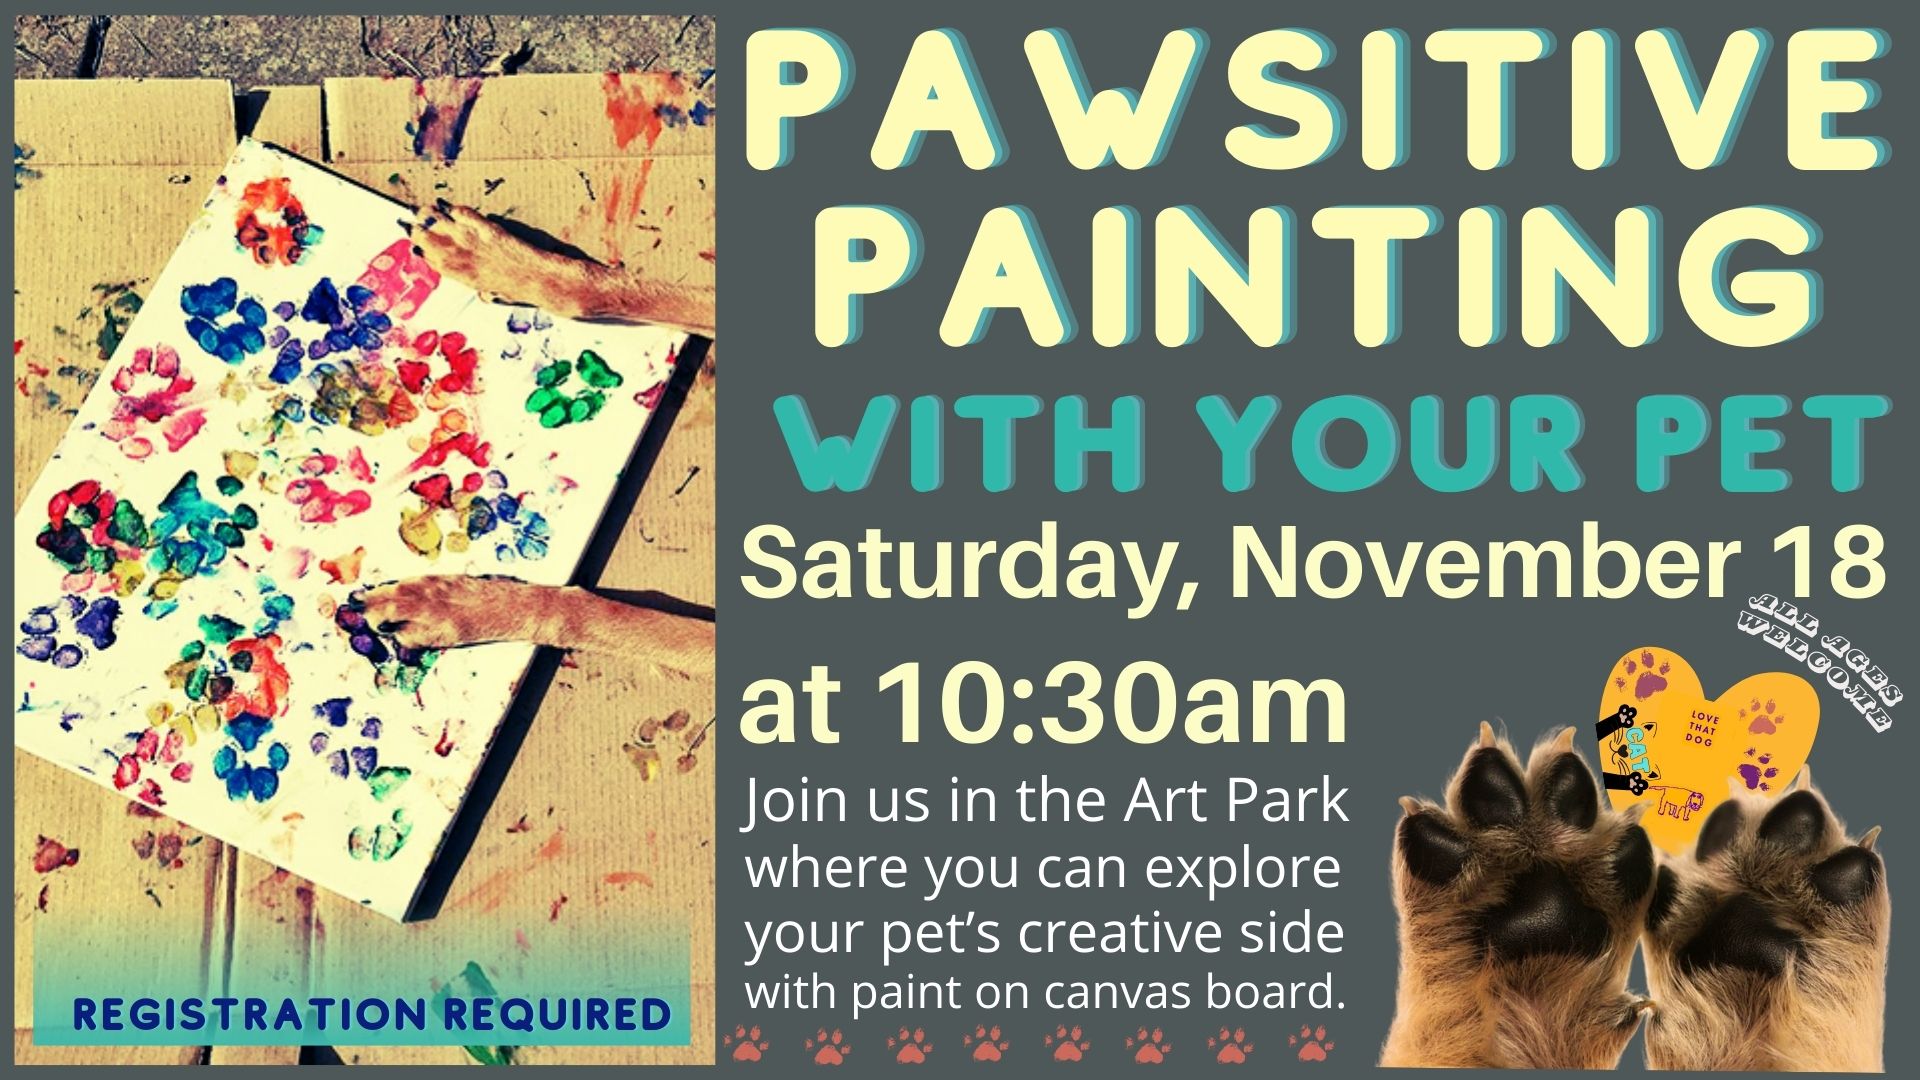 Pawsitive Painting with your pet 